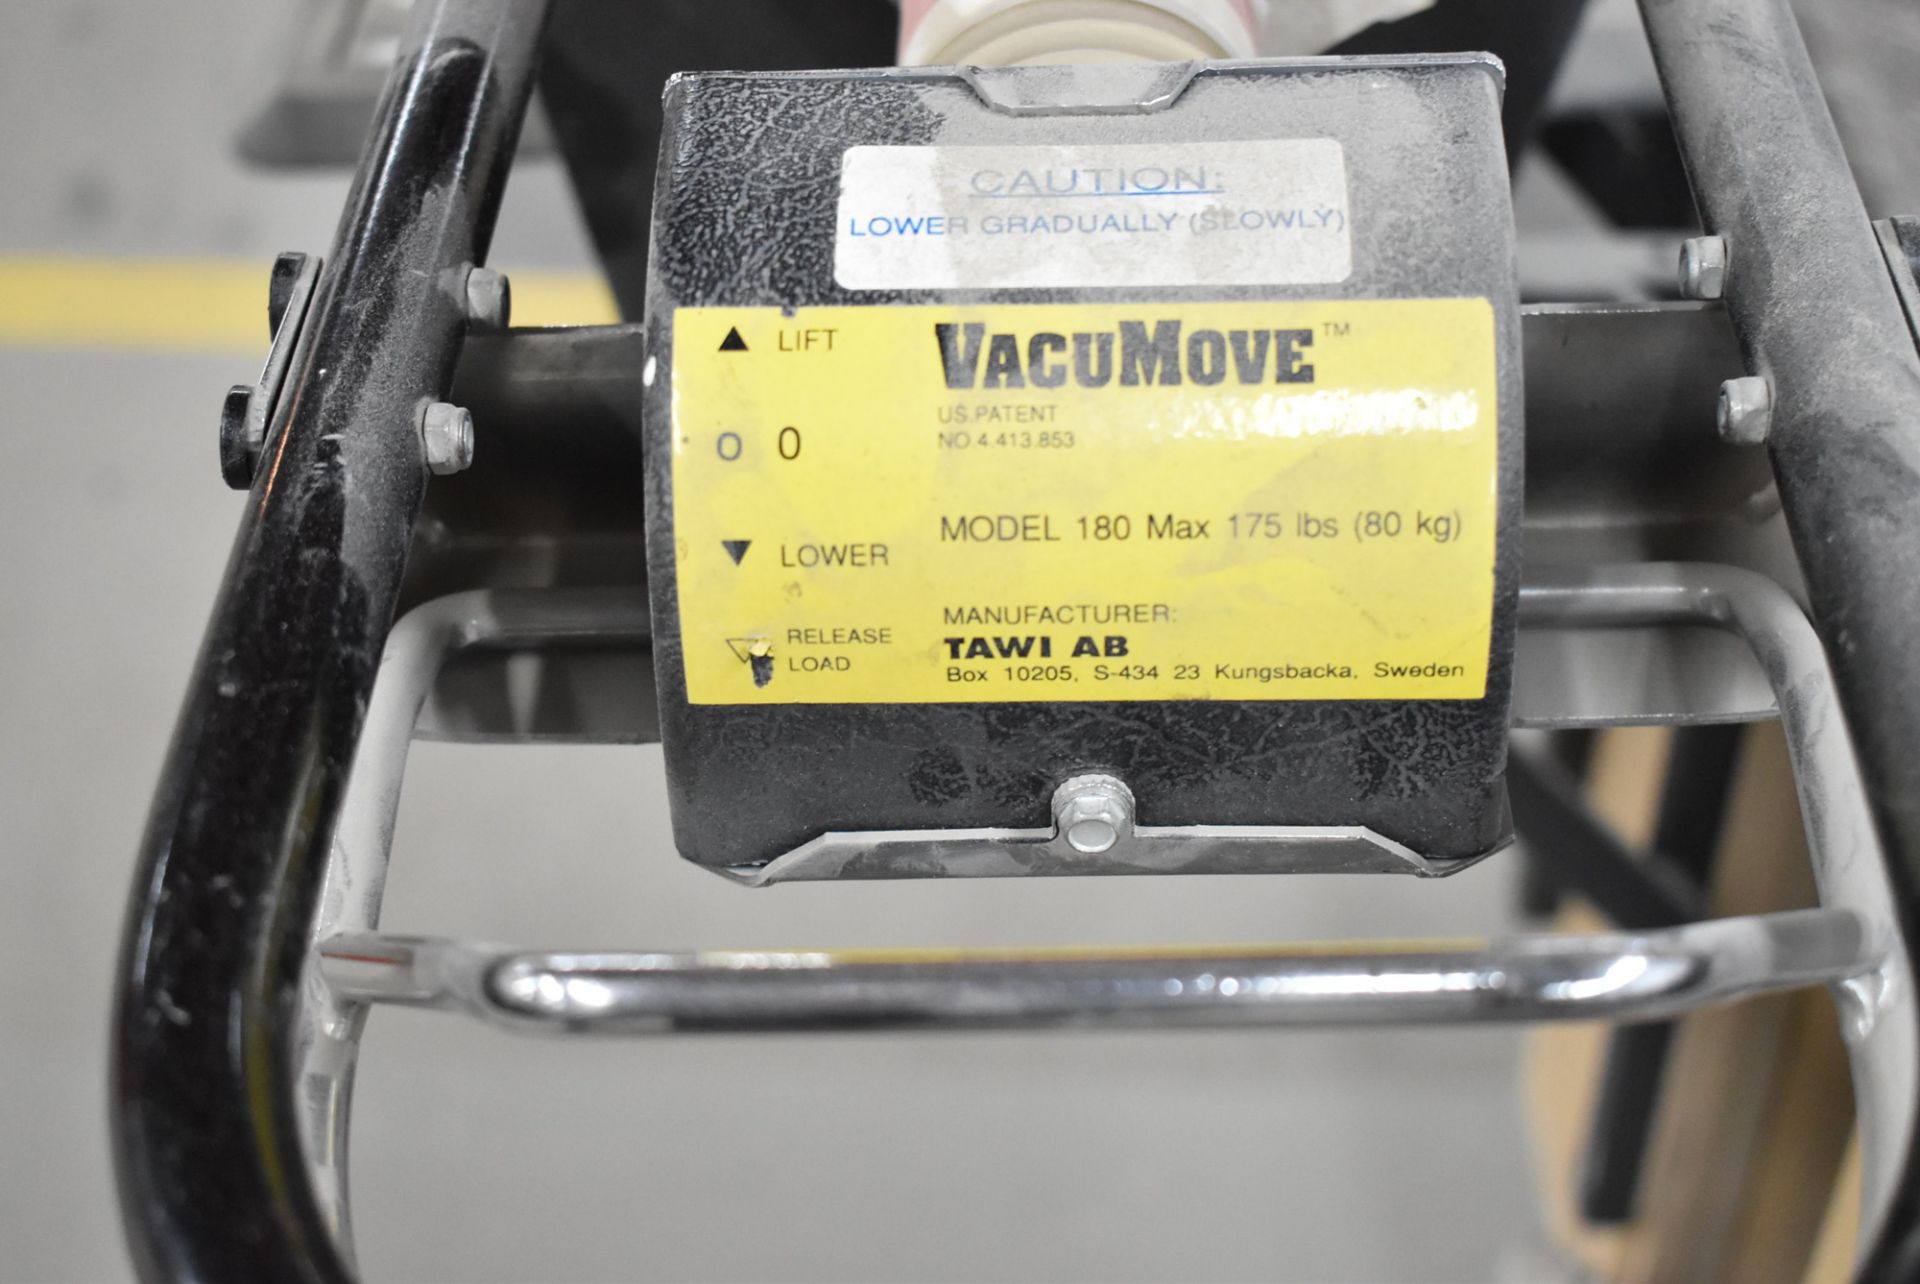 LOT/ VACUMOVE MODEL 180 VACUUM LIFTER WITH ASSOCIATED HOSES, SUPPORTS AND VACUUM UNIT (CI) - Image 2 of 6